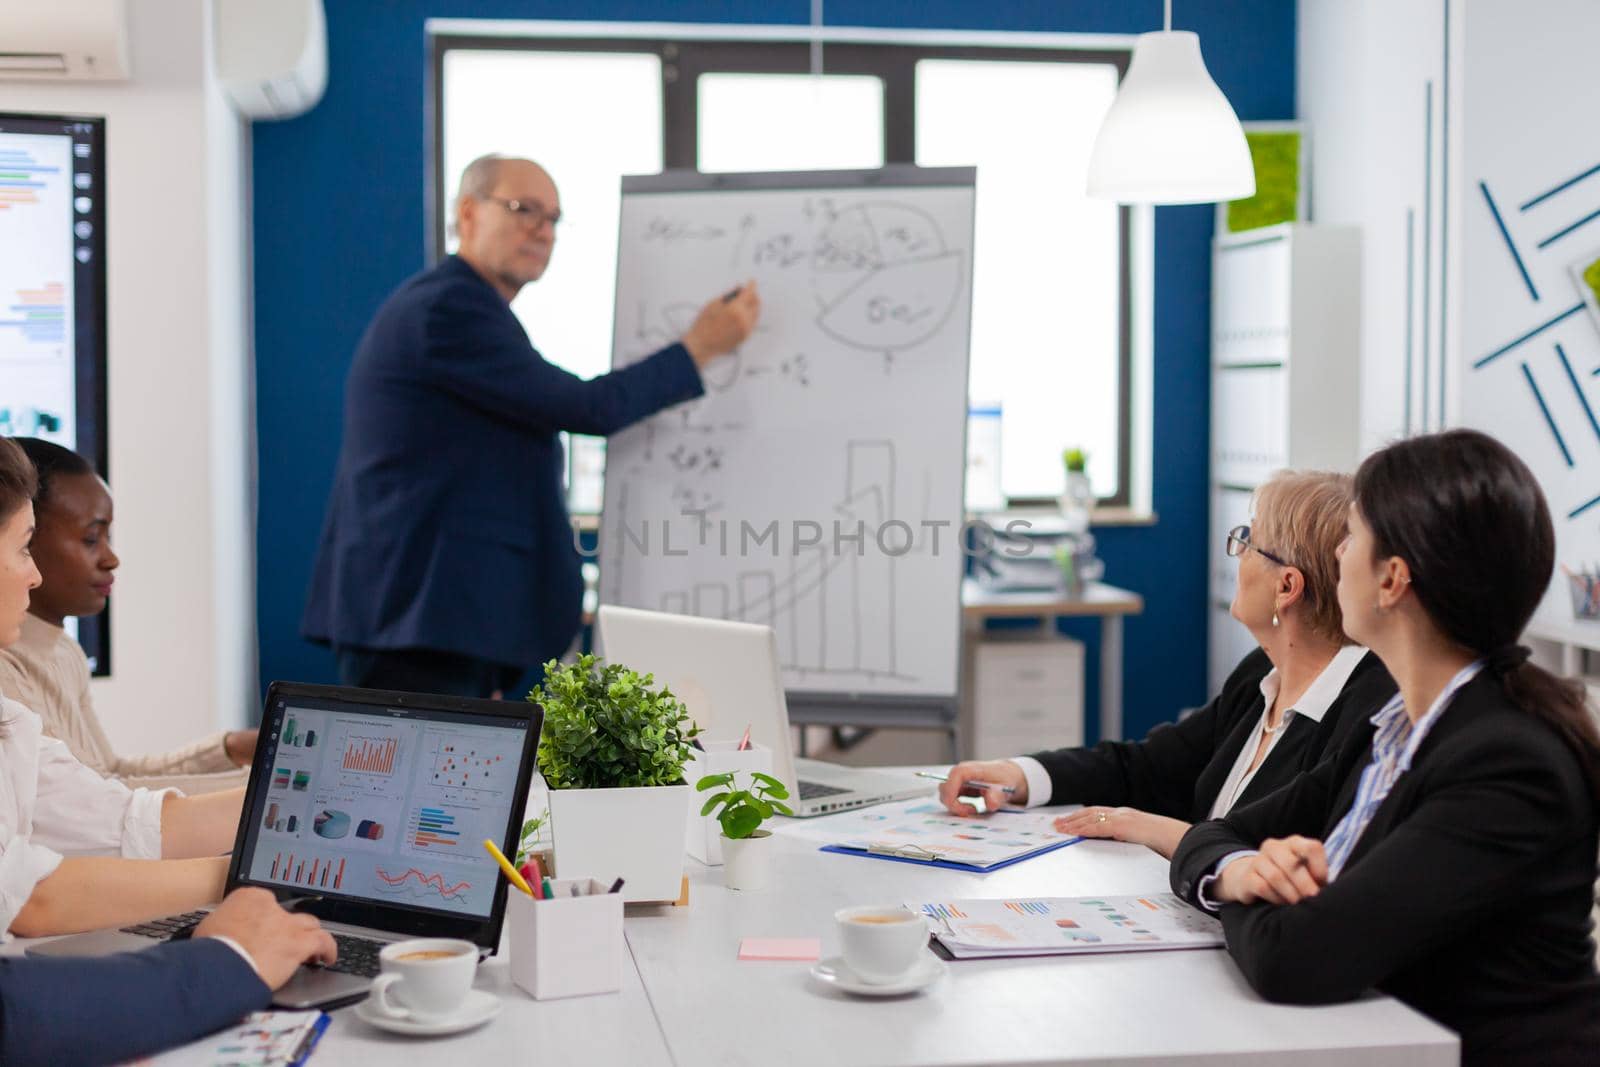 Elderly businessman giving presentation to multiethnic team of colleagues using flip chart. Serious speaker boss executive, business trainer explaining development strategy to motivated mixed race employees.